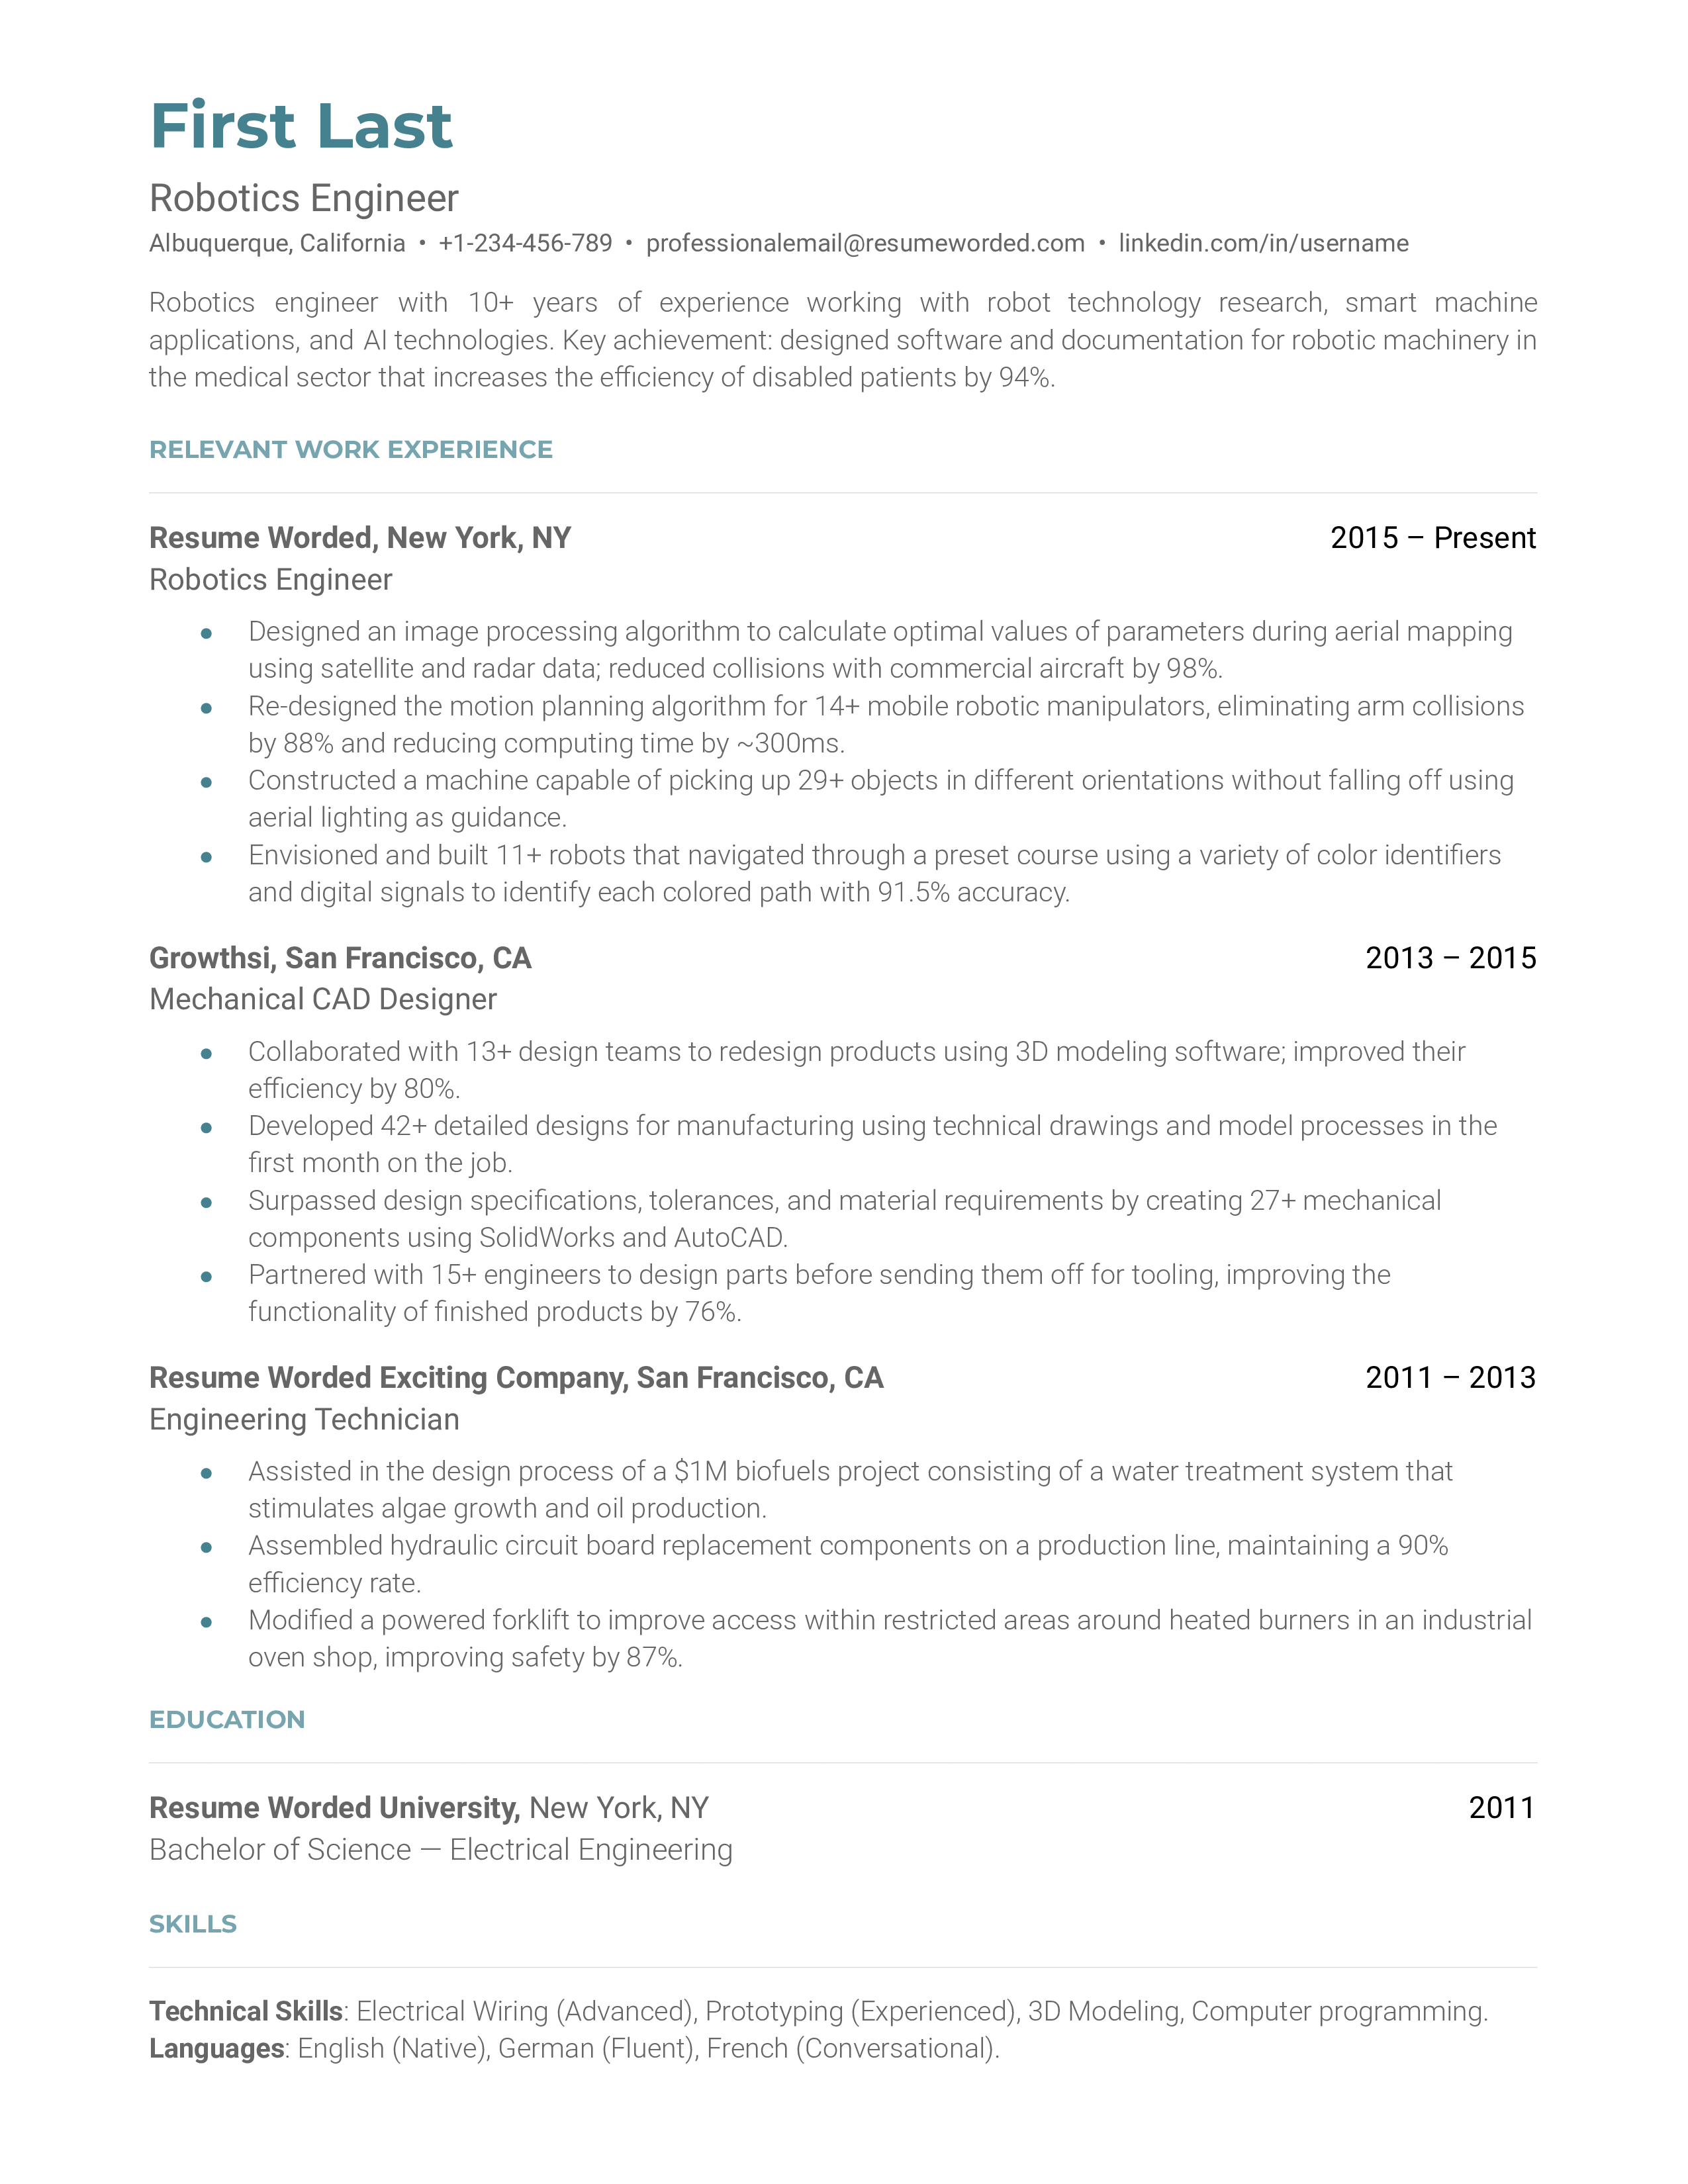 A robotics engineer resume template including contact information and relevant work experience.